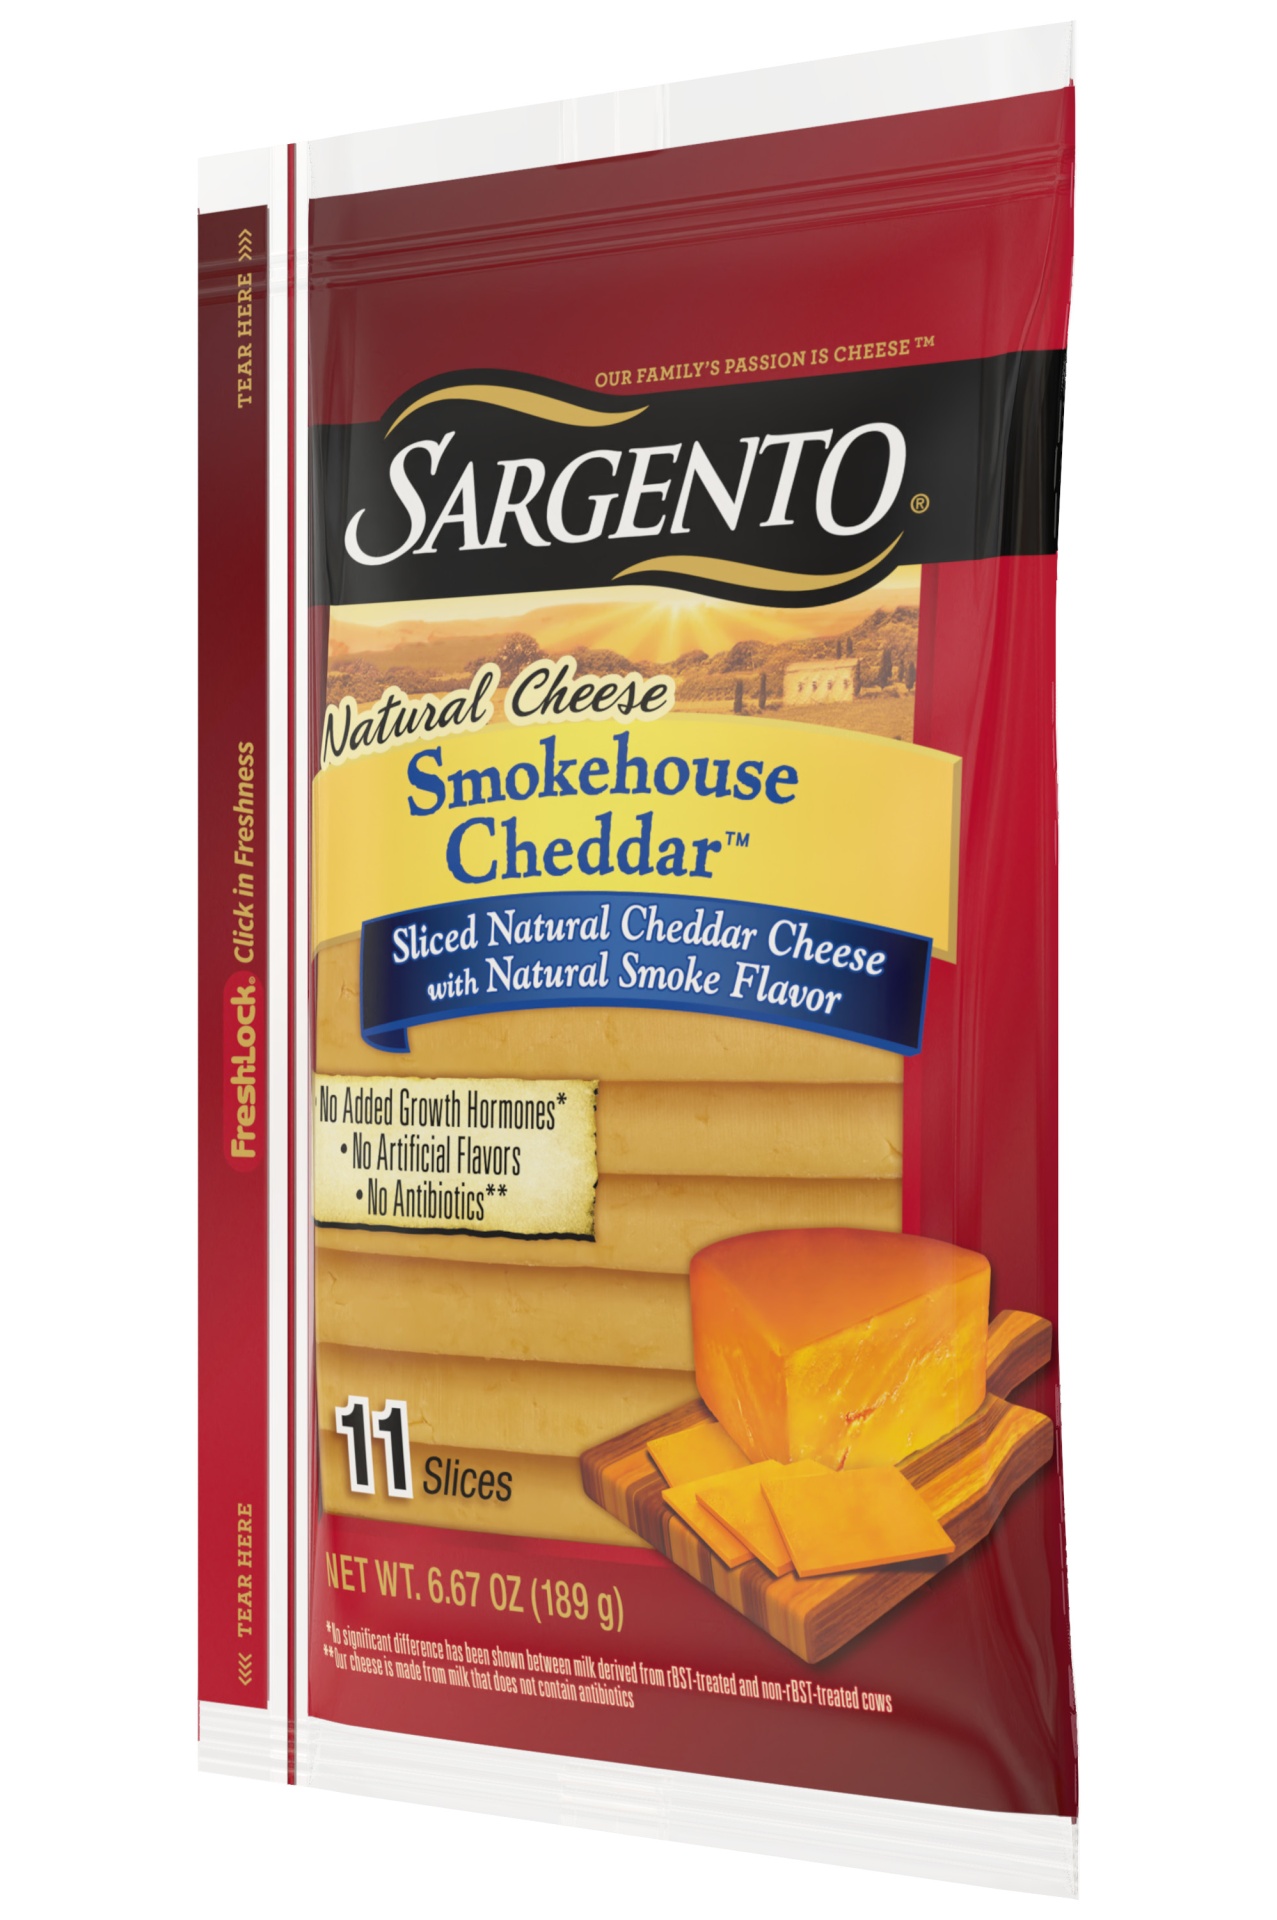 Sargento Natural Smoked Flavored Sliced Cheddar Cheese 6.67 oz Shipt